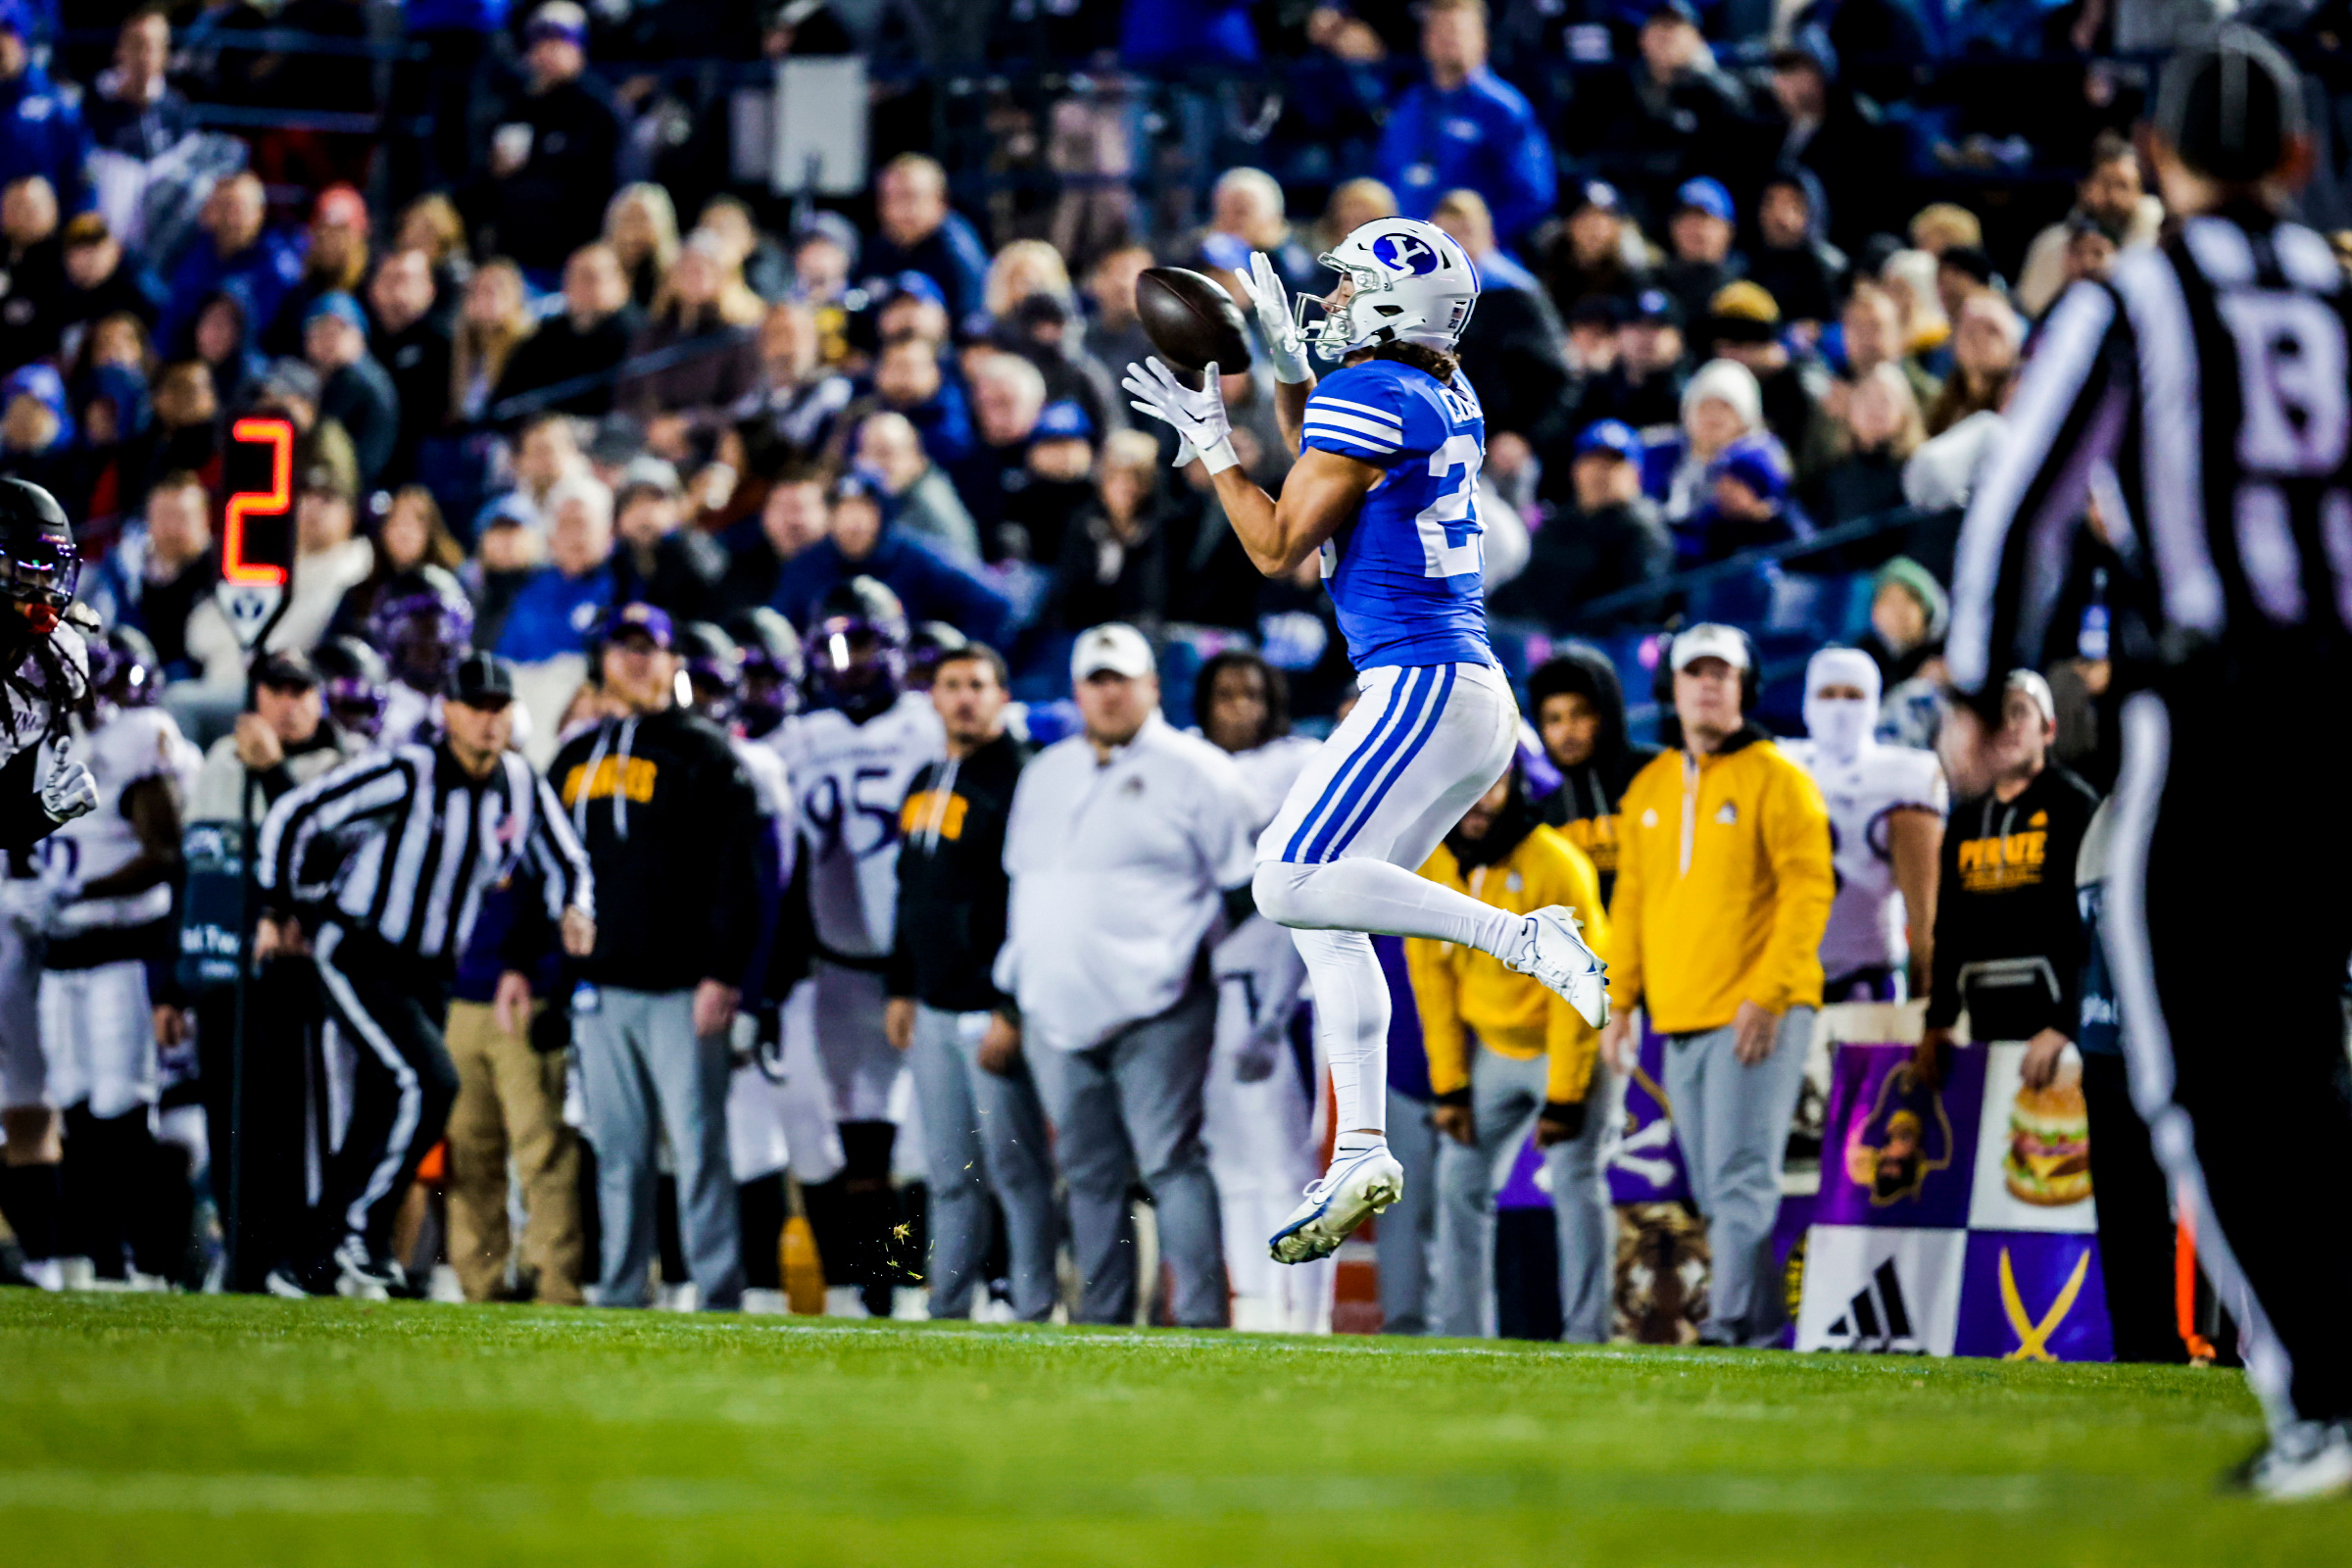 BYU wide receiver Braden Cosper catches a pass on the East Carolina sideline